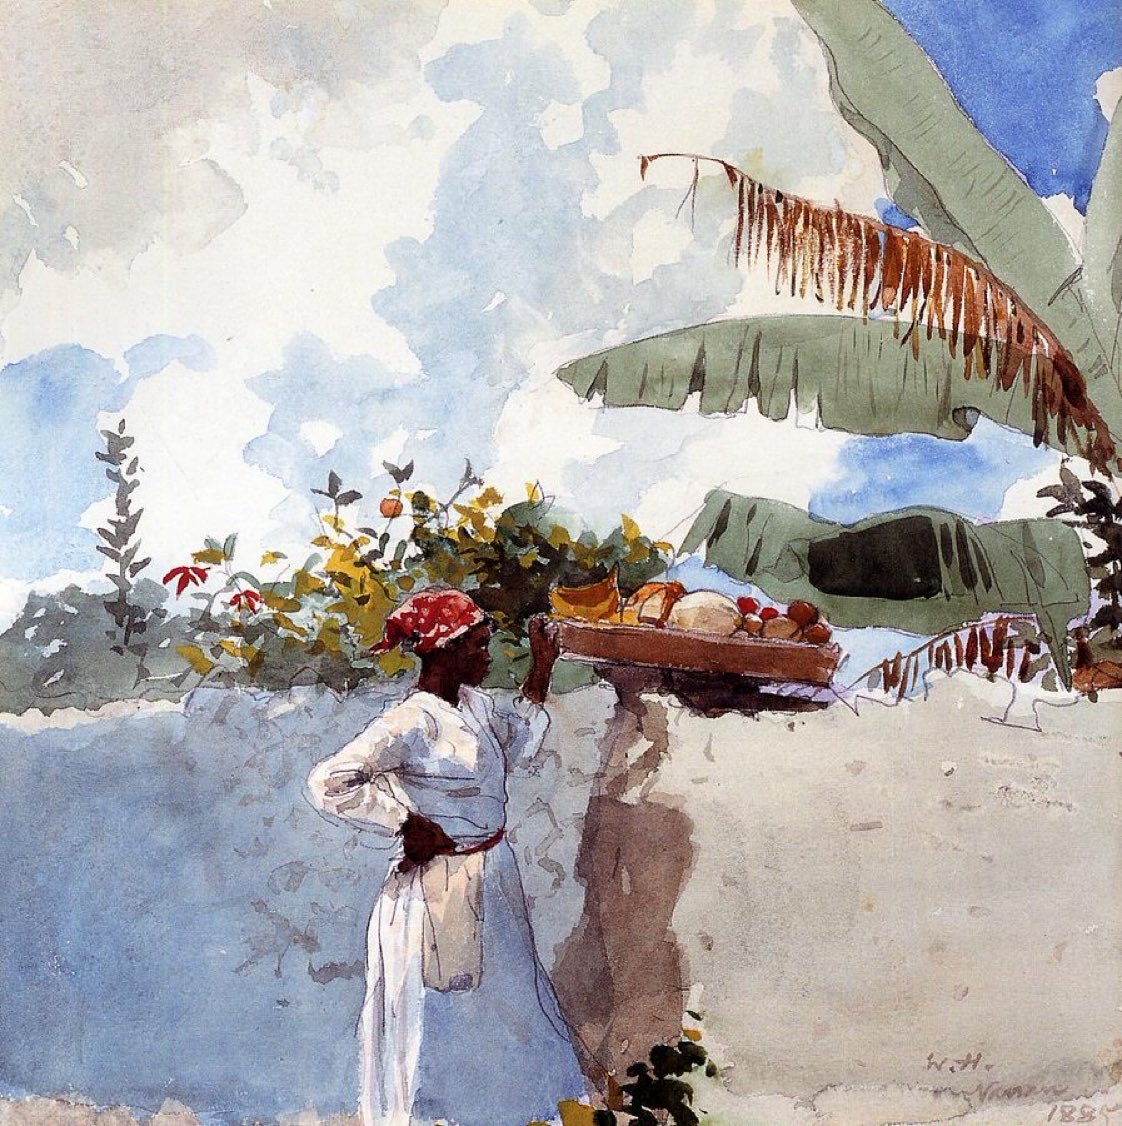 'Rest' 1885, #WinslowHomer Carribean Series #watercolor